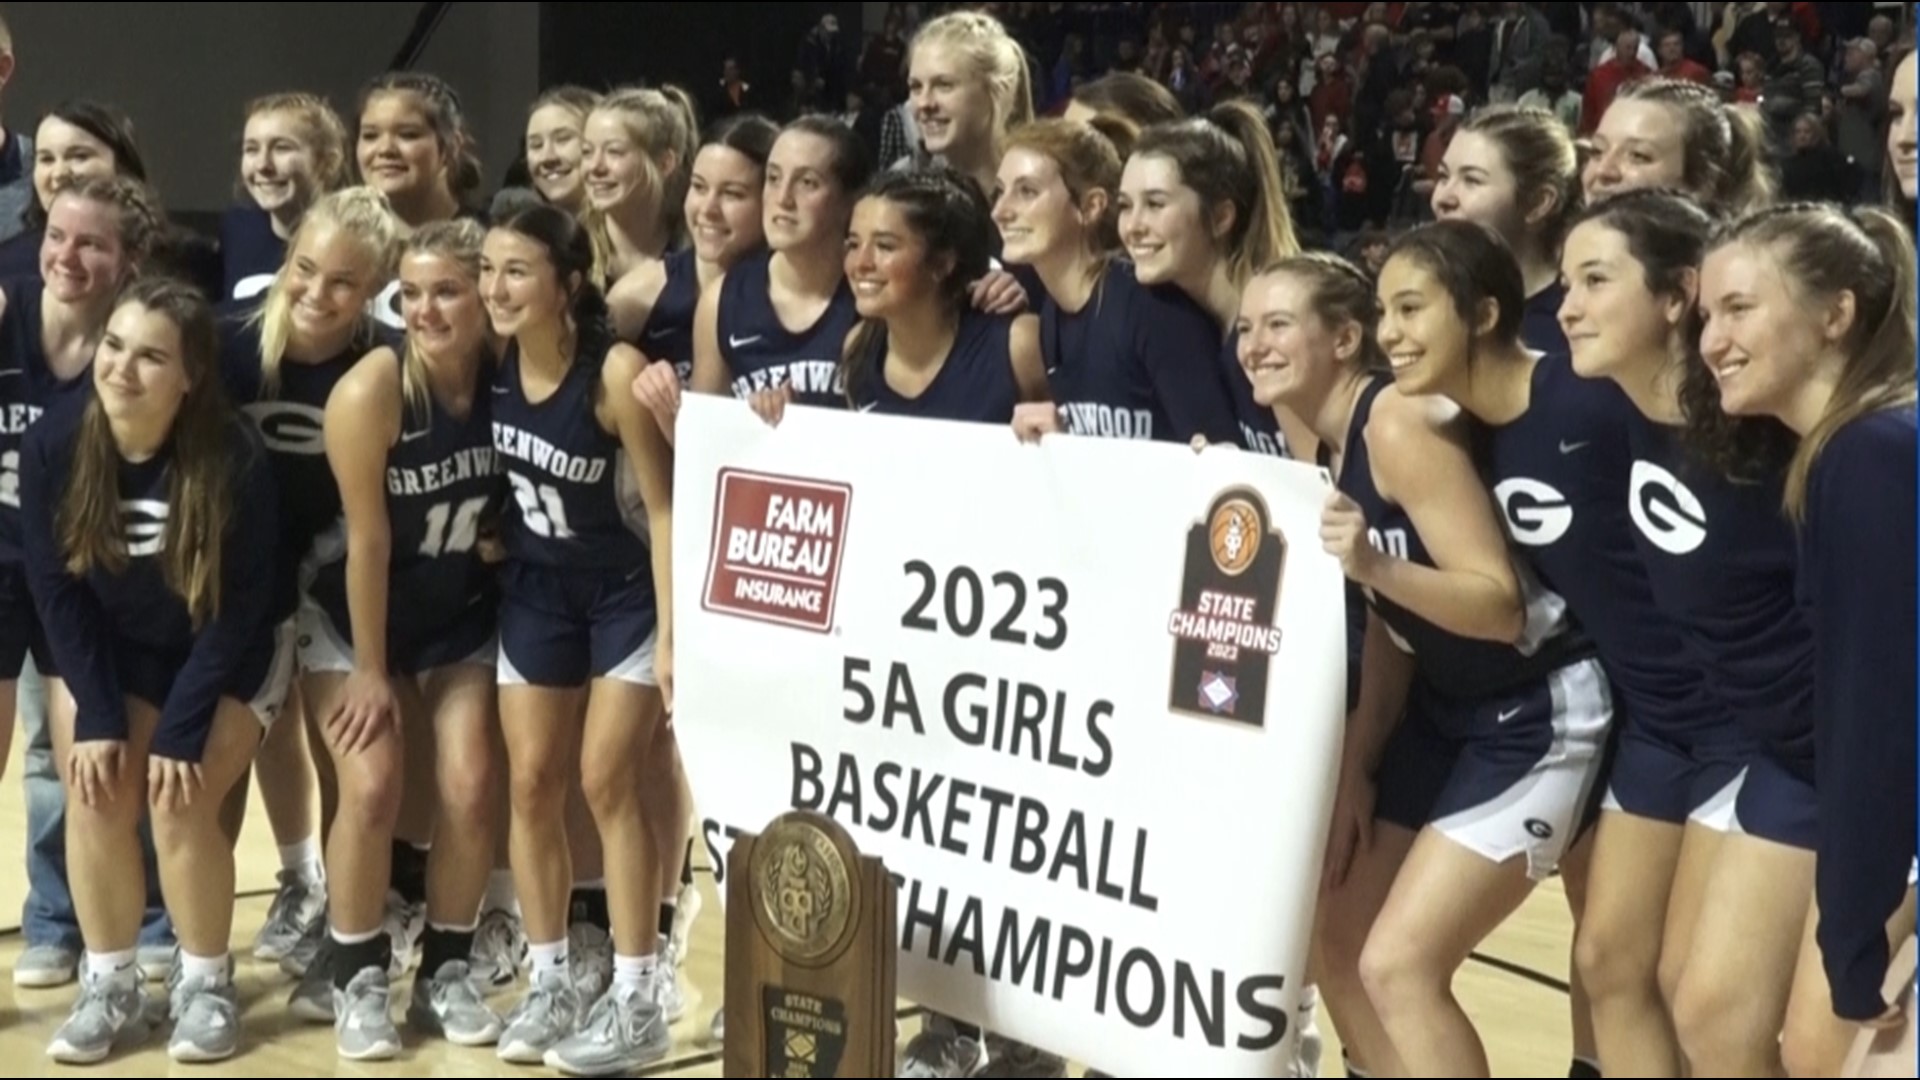 The Lady Bulldogs have won three of the last four 5A girl's titles.